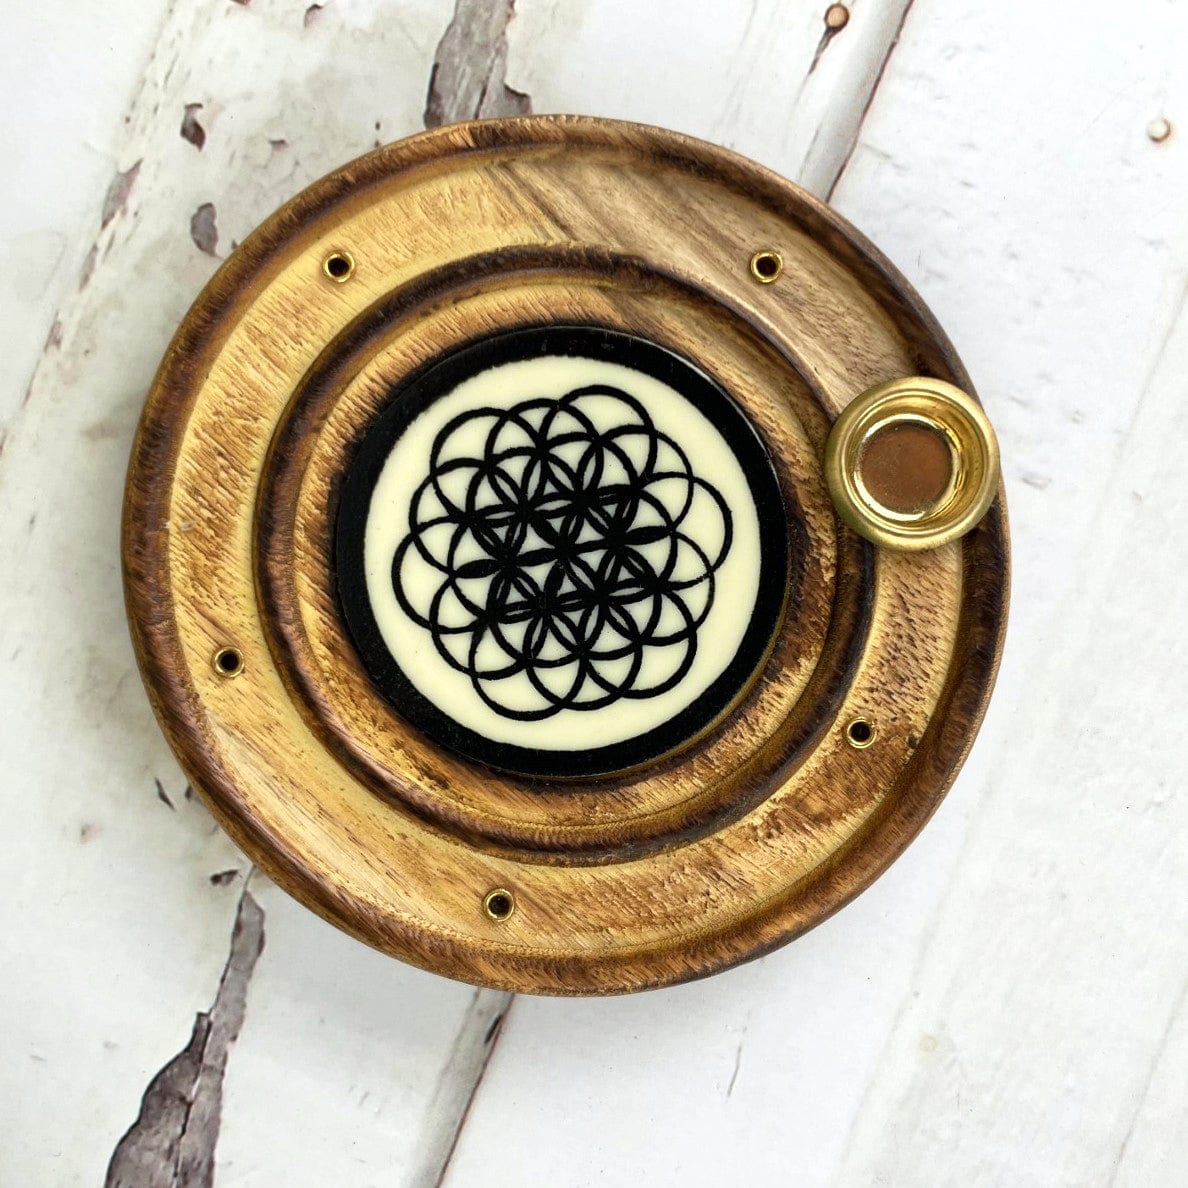 top view of the burner to show the details of the flower of life and multiple incense holder holes. also comes with a cone burner holder 